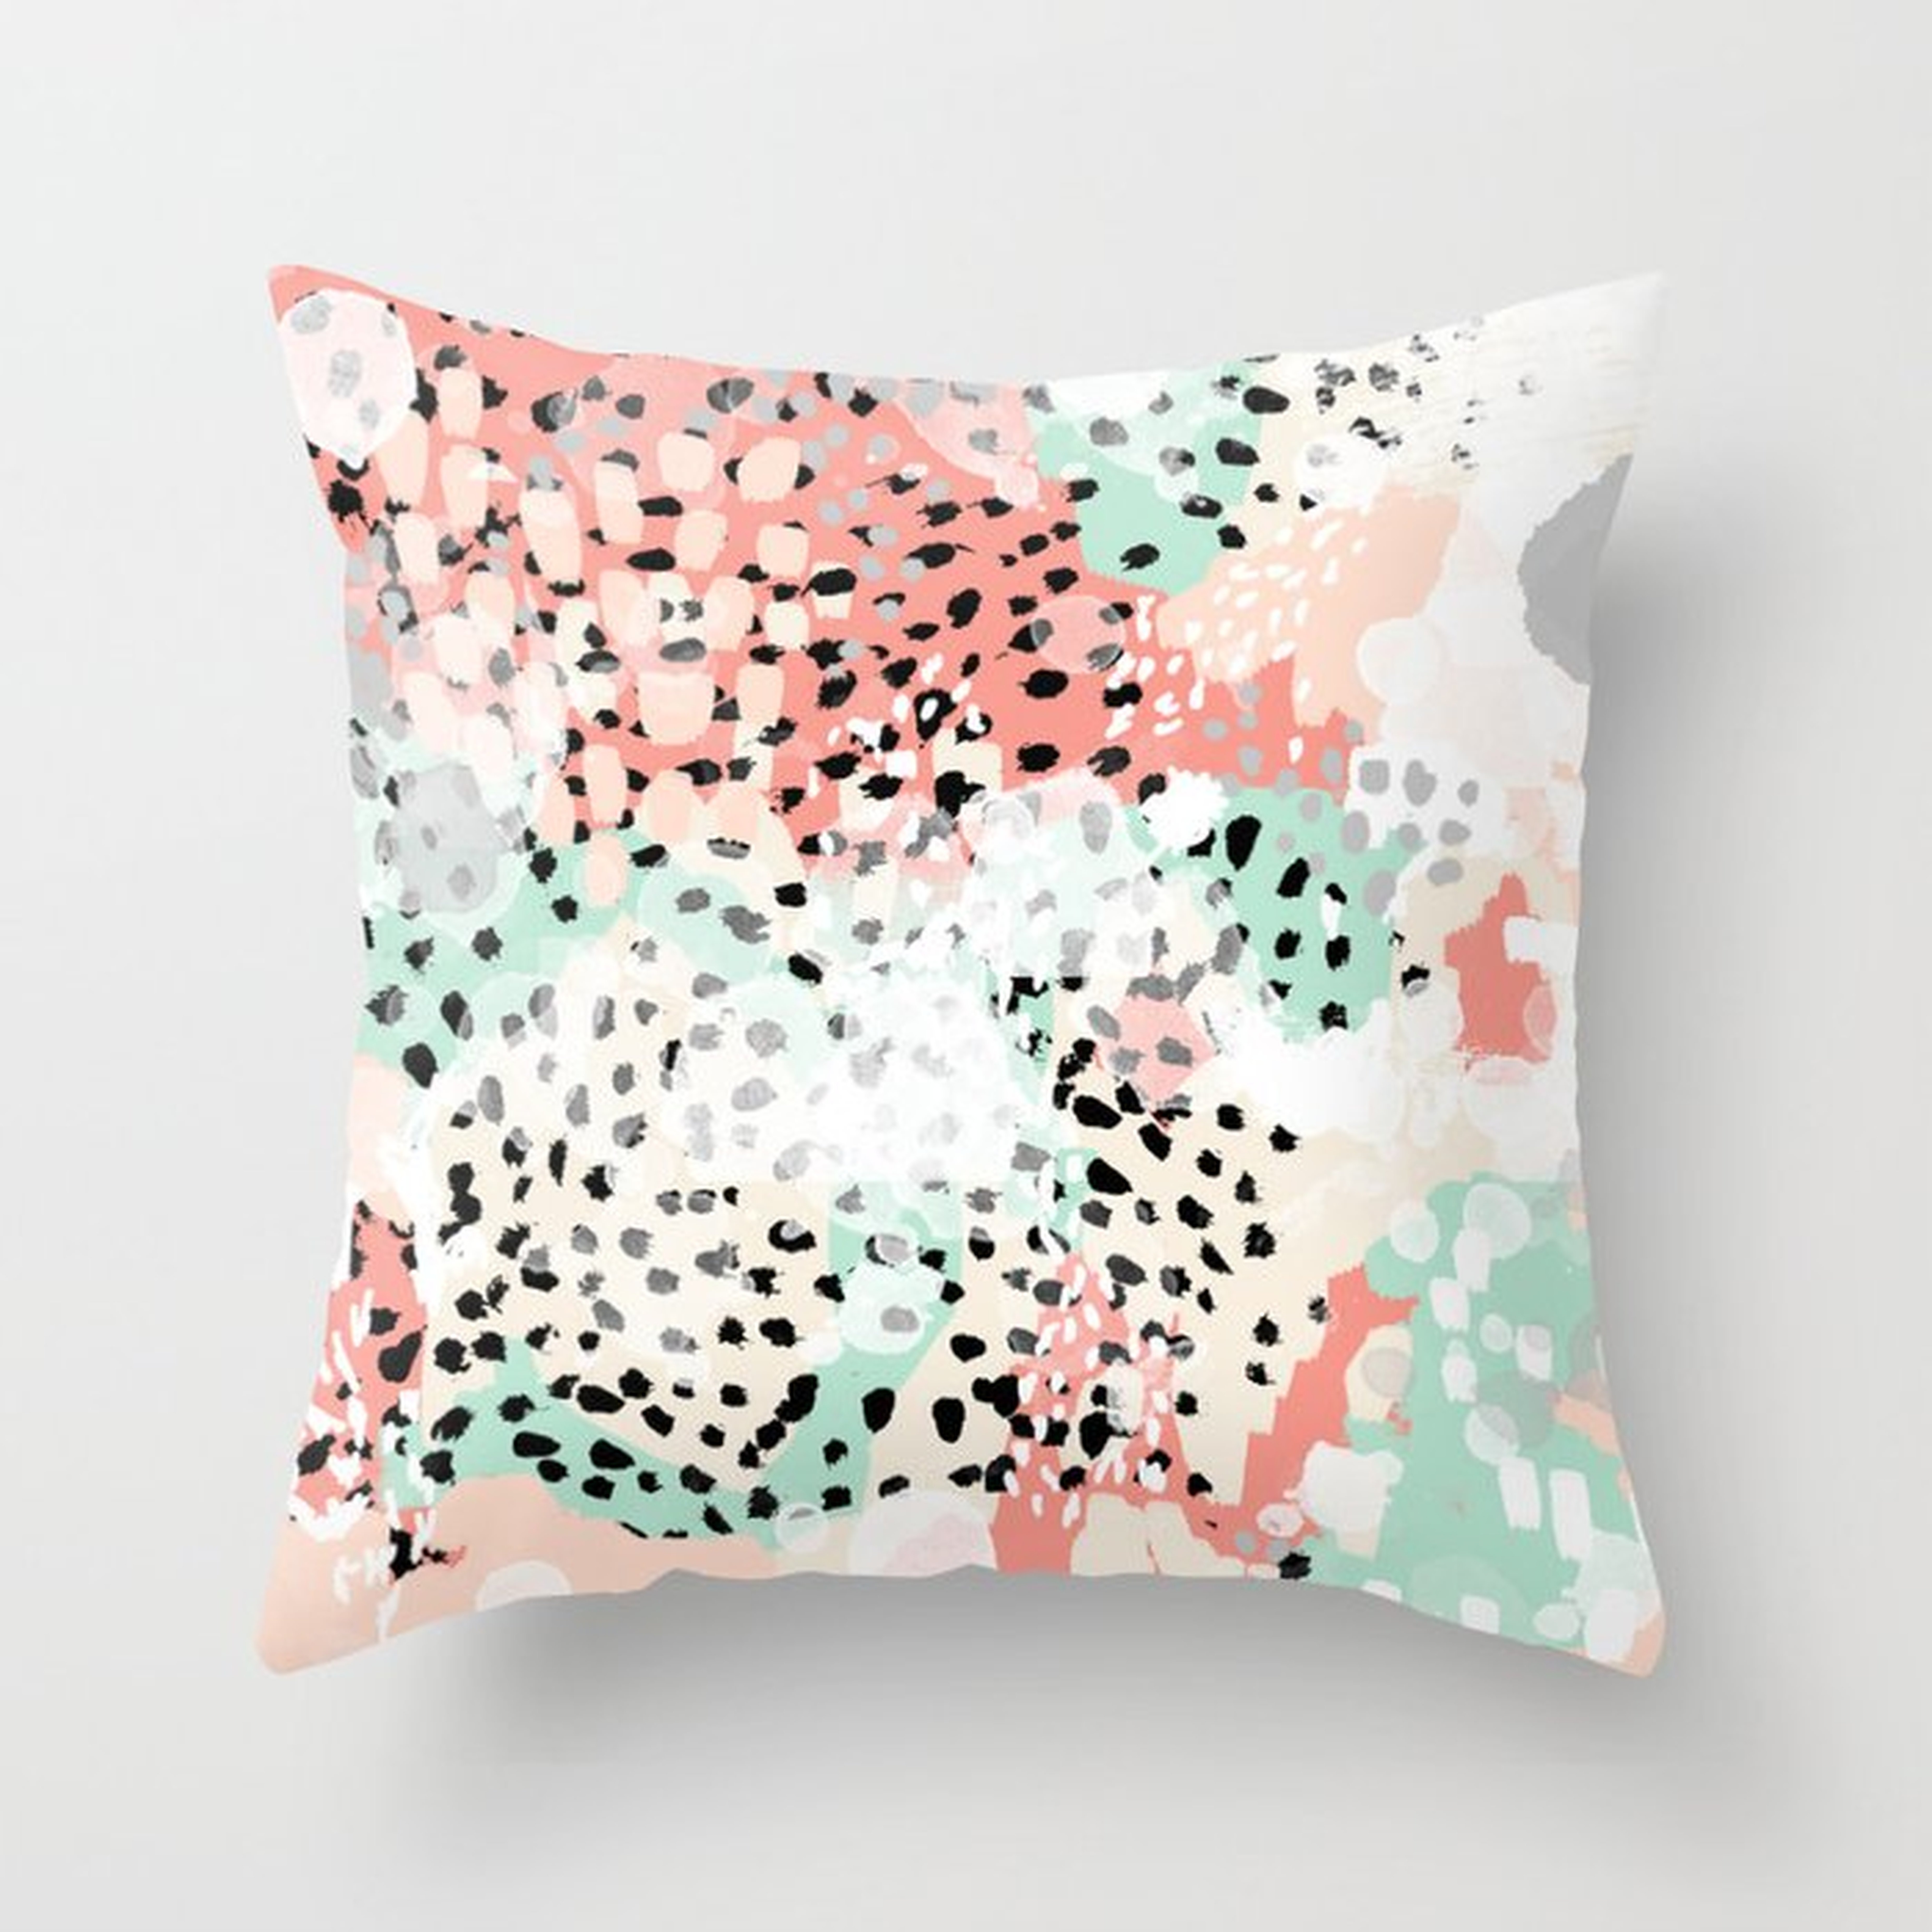 Phoebe - abstract painting minimal gender neutral trendy nursery decor home office art Throw Pillow - Society6